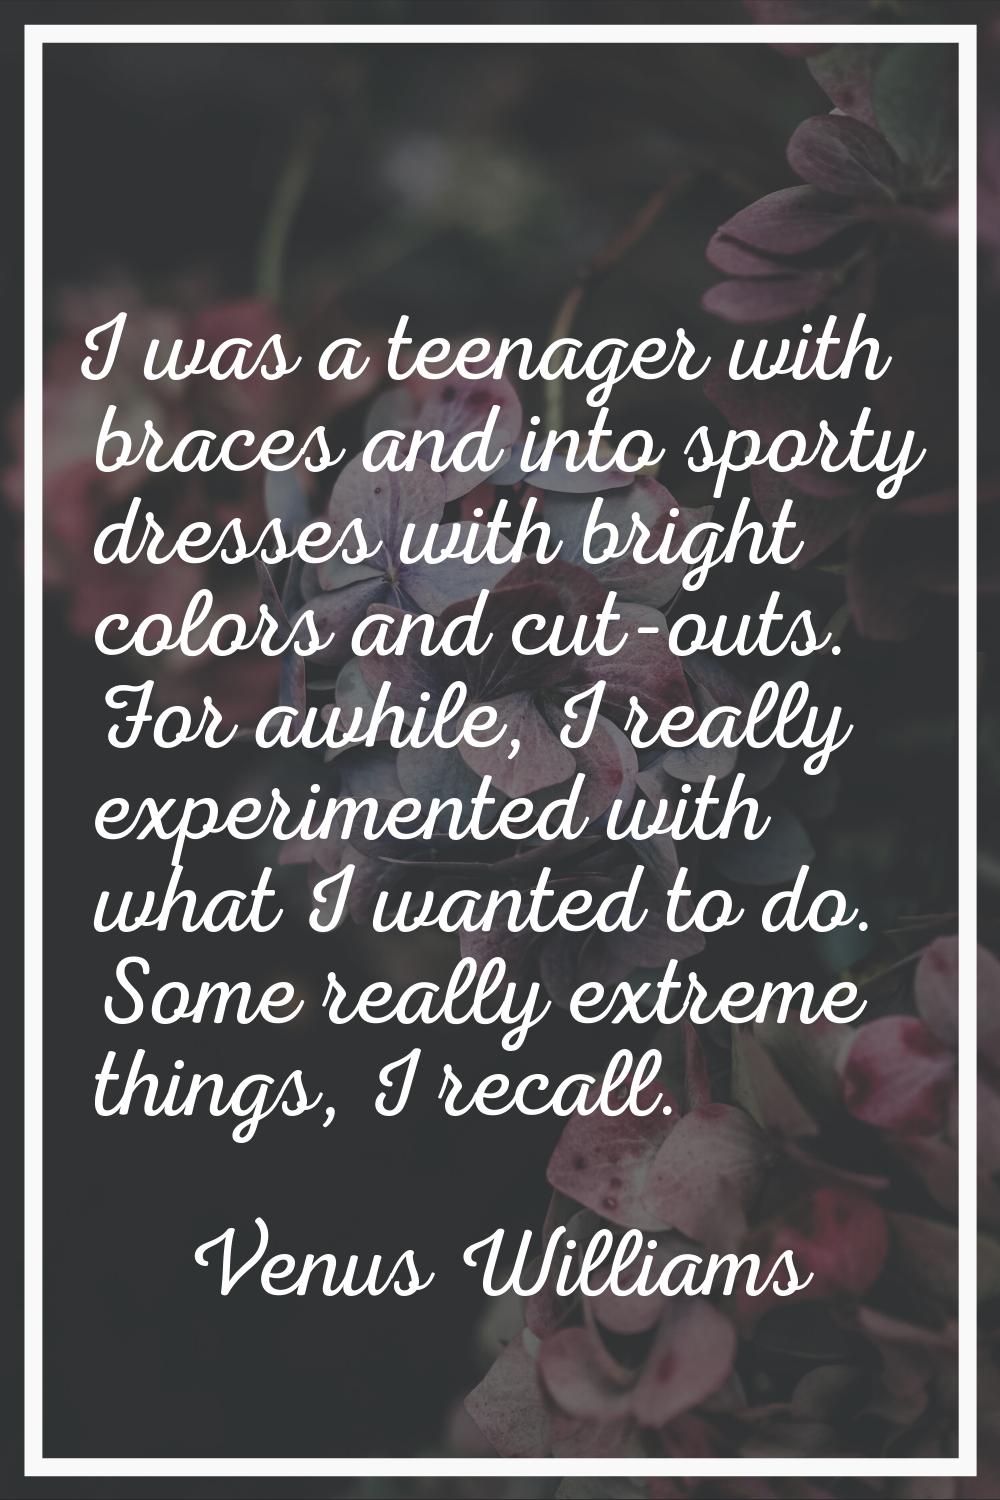 I was a teenager with braces and into sporty dresses with bright colors and cut-outs. For awhile, I